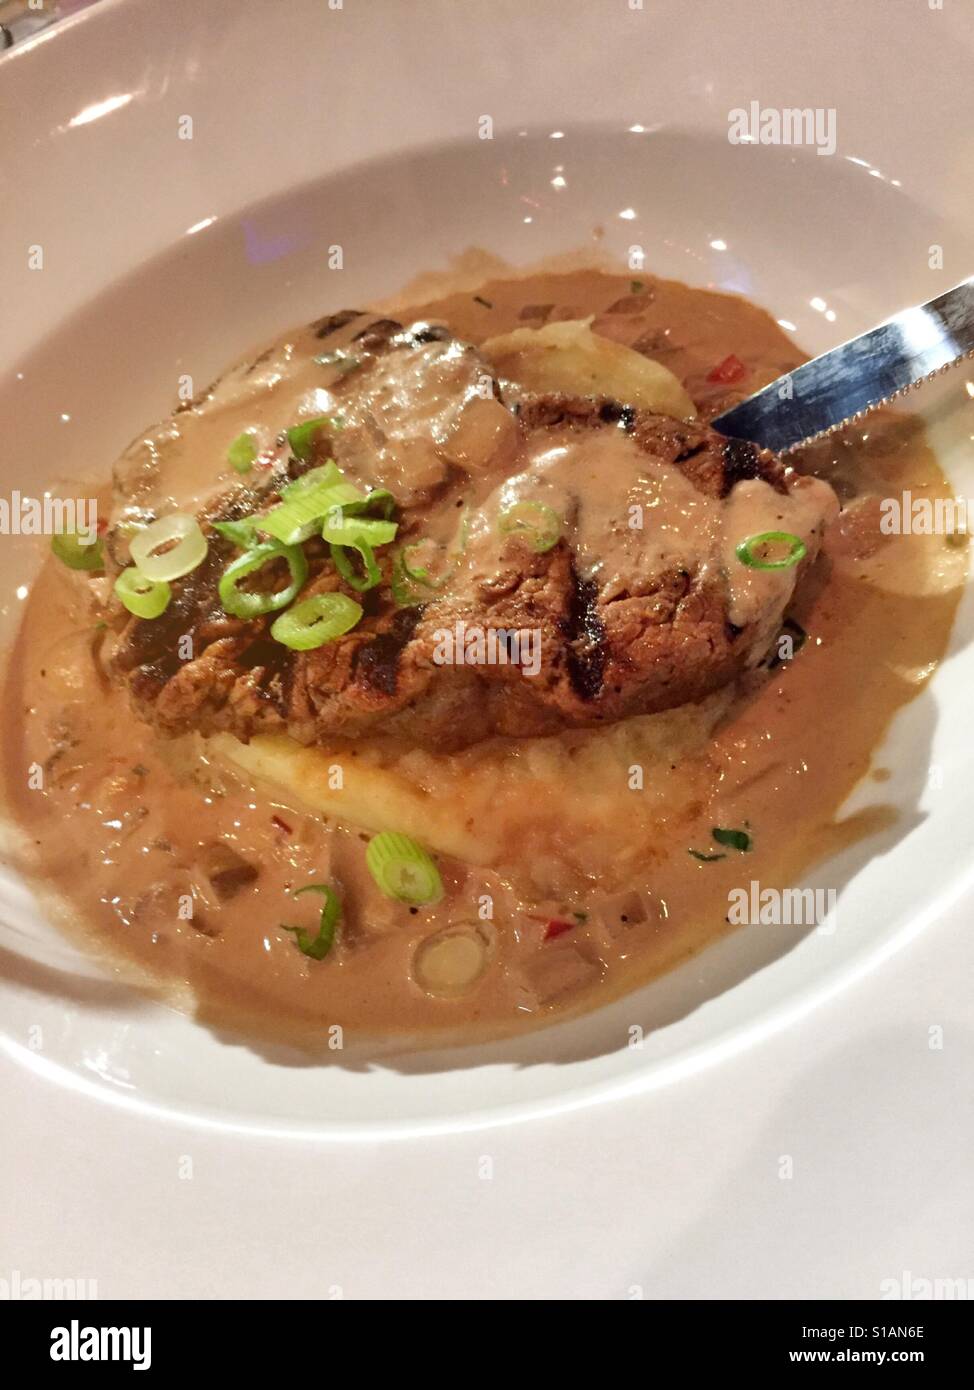 Fillet mignon steak topped with a red wine mushroom cream sauce and served with mashed potatoes in upscale luxury restaurant, NYC, USA Stock Photo